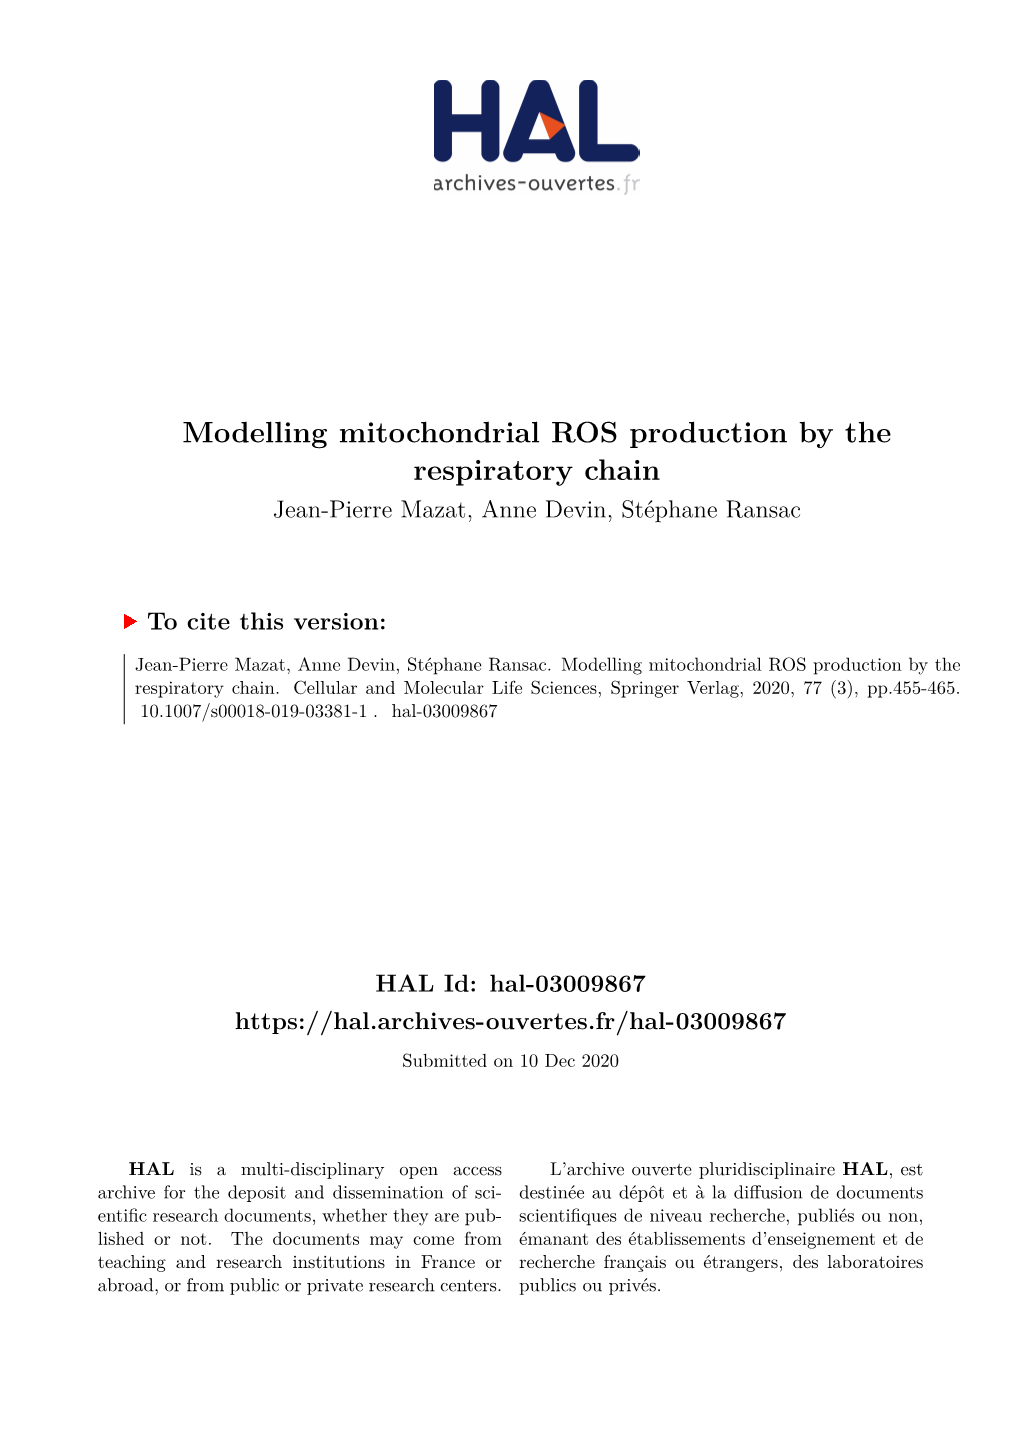 Modelling Mitochondrial ROS Production by the Respiratory Chain Jean-Pierre Mazat, Anne Devin, Stéphane Ransac